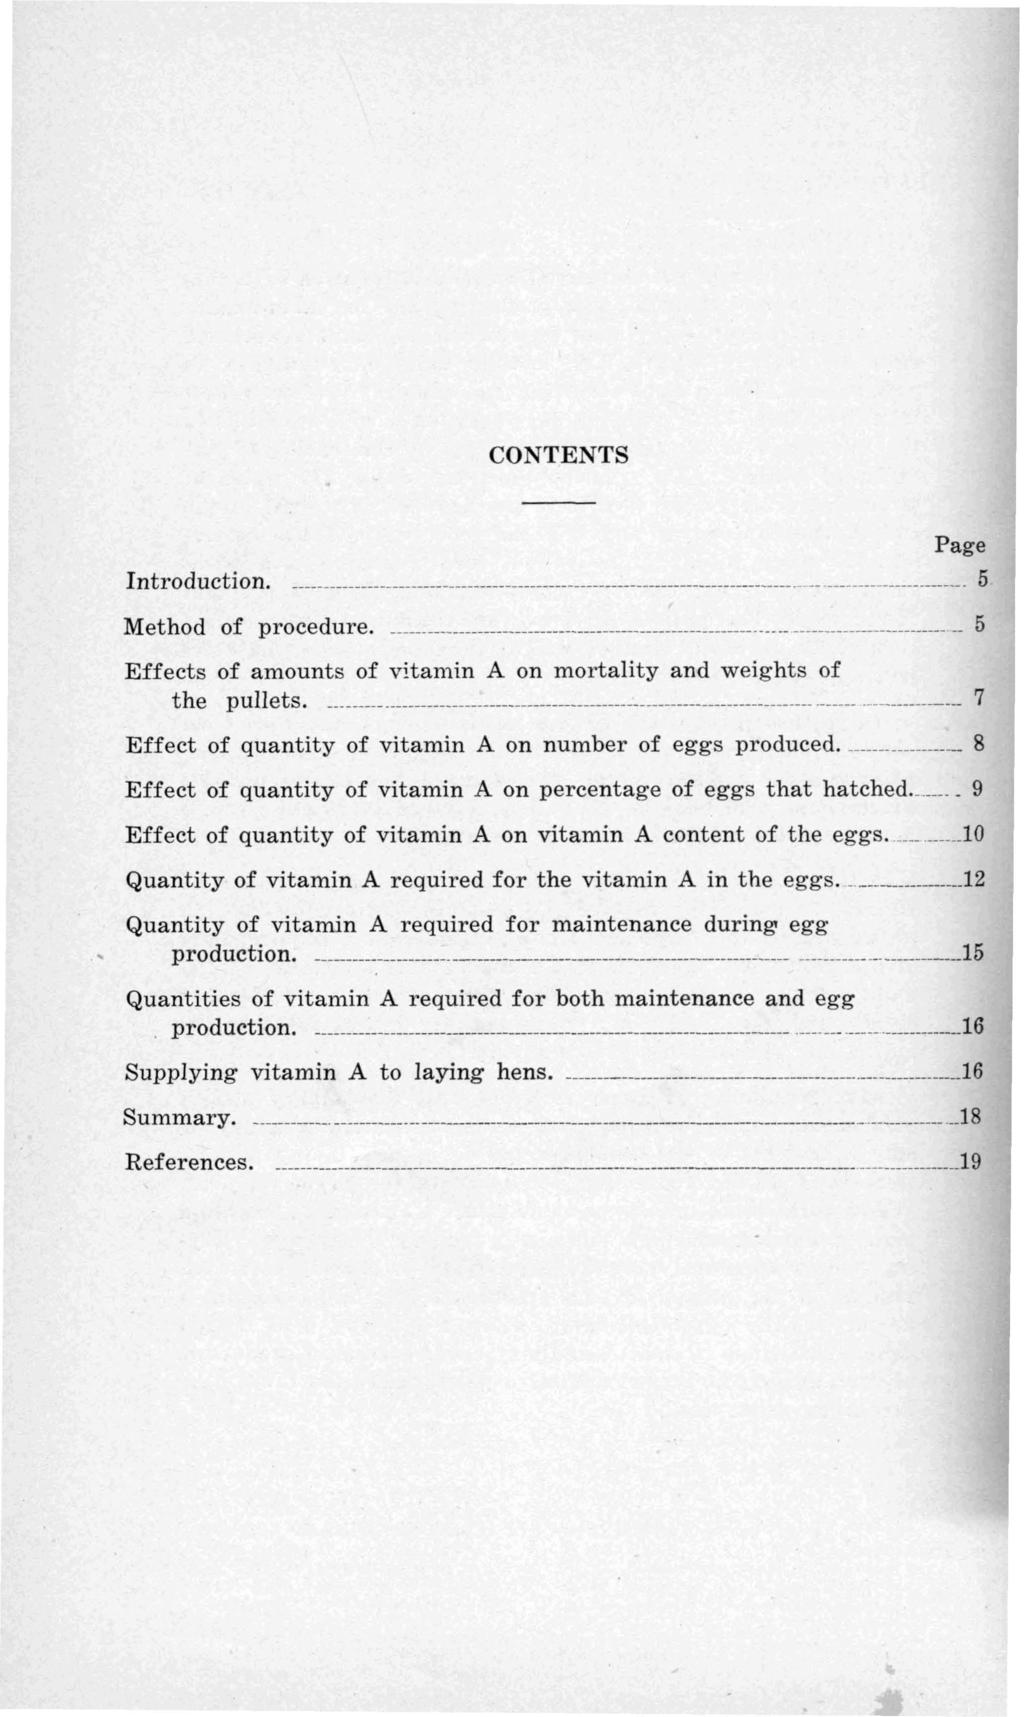 CONTENTS Page Introduction. 5 Method of procedure. -_._------_---------------------------------. -- 5 Effects of amounts of vitamin A on mortality and weights of the pullets.